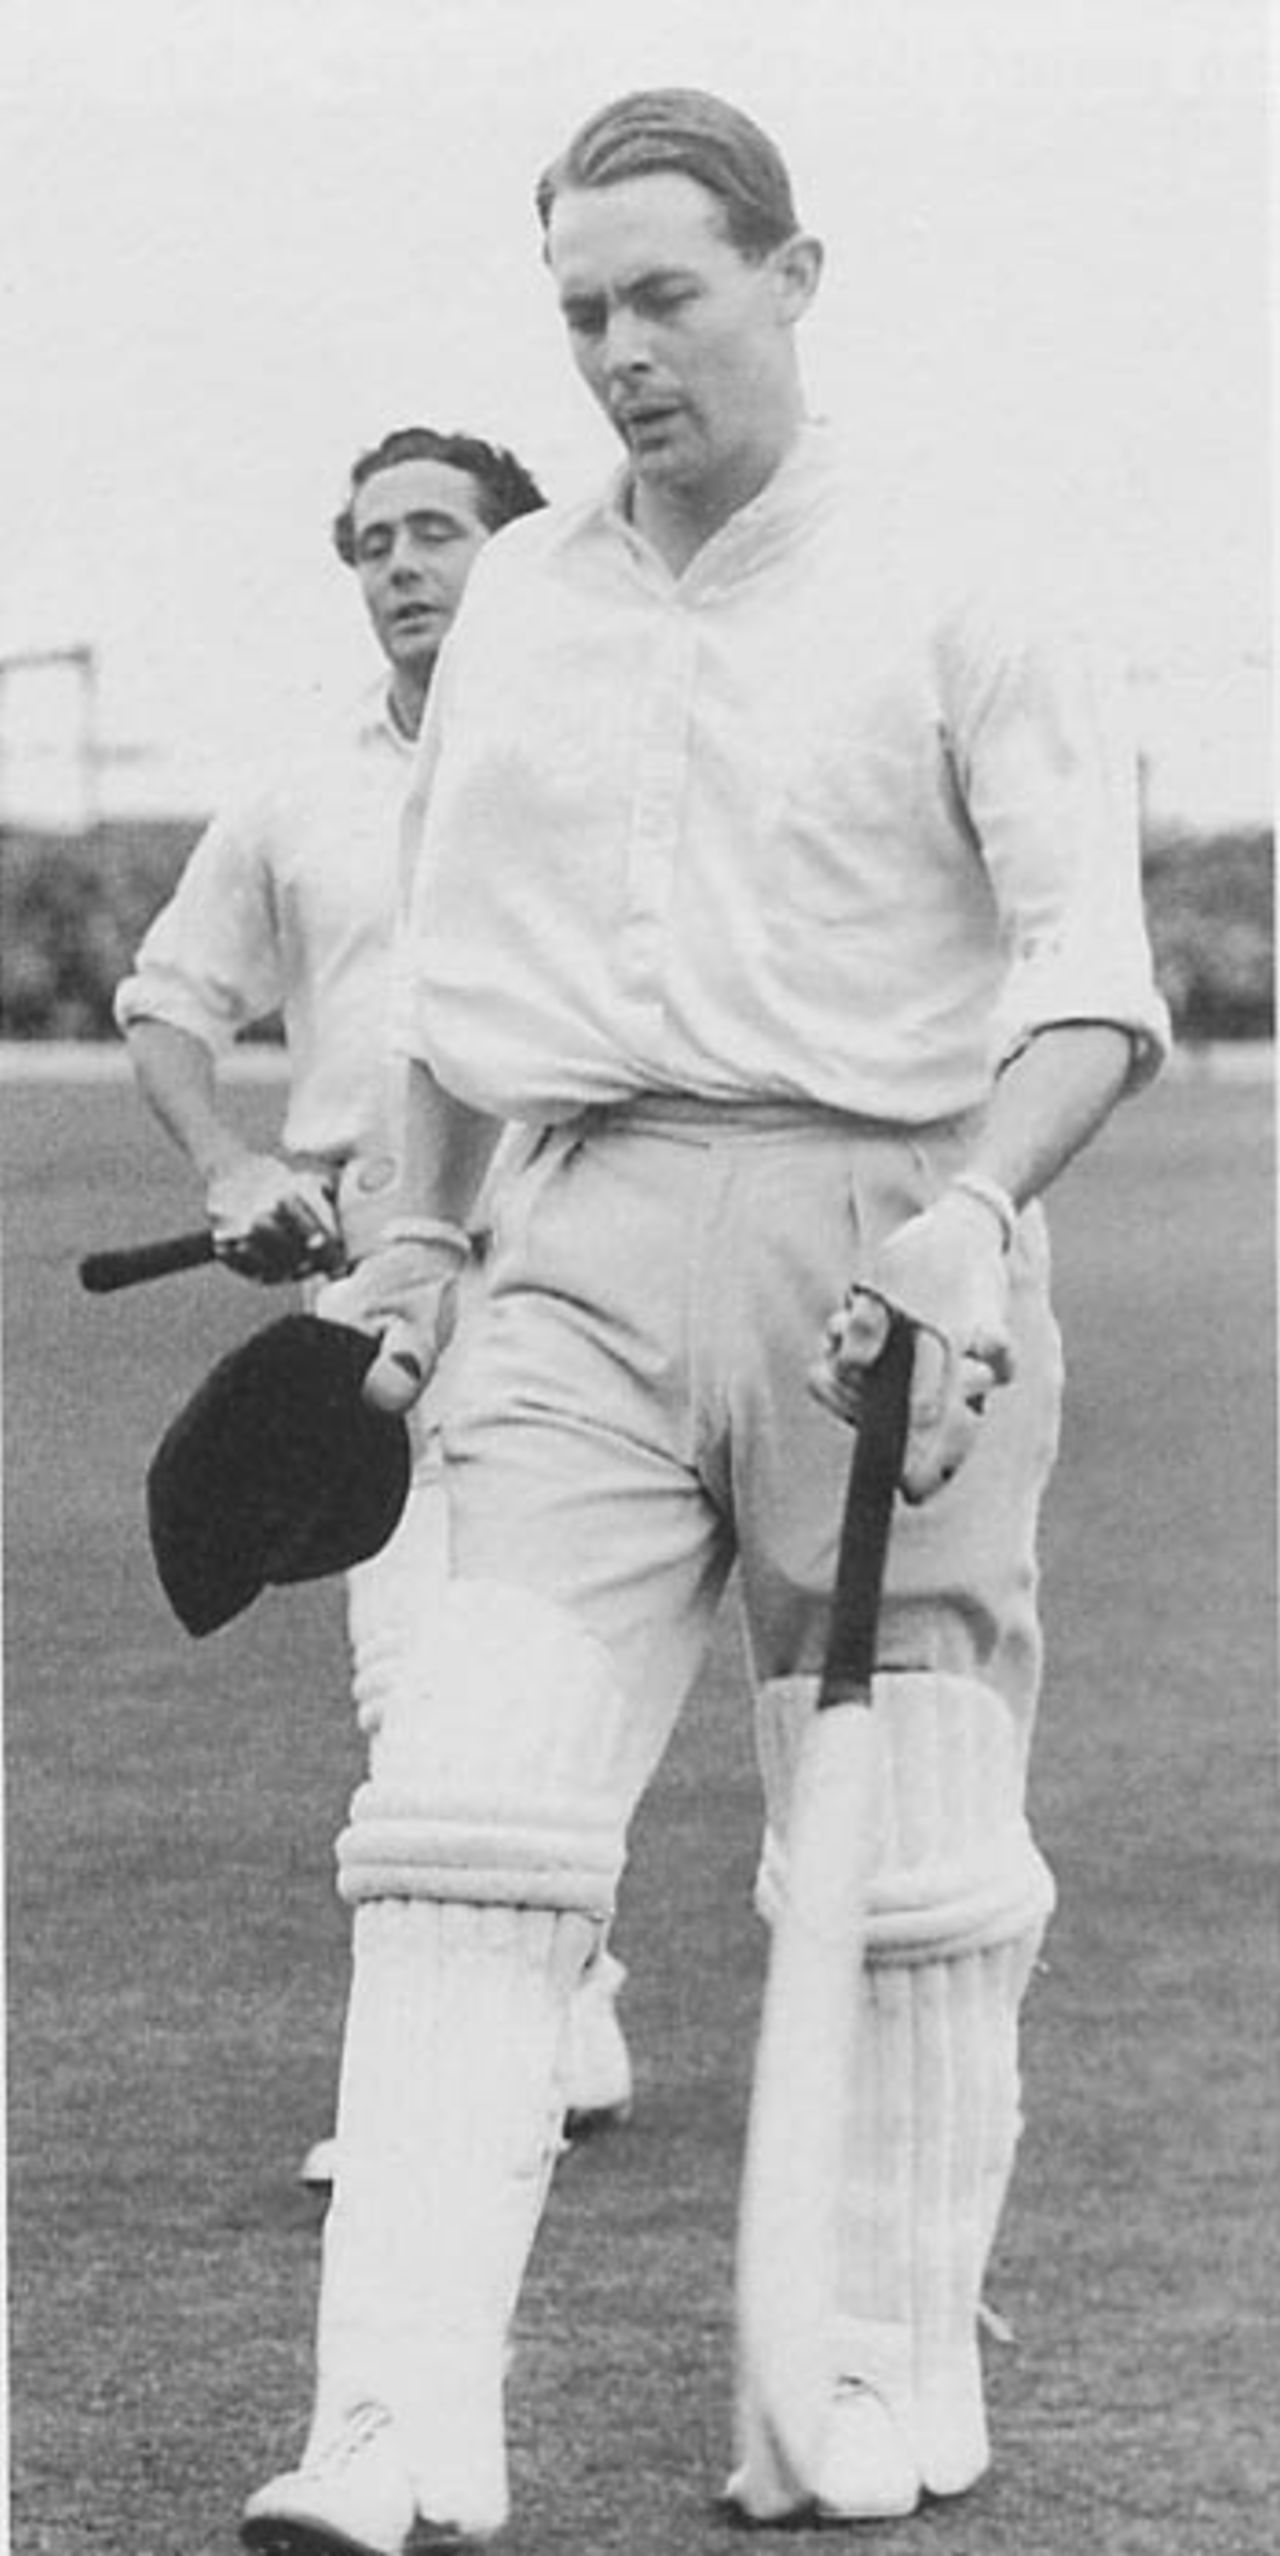 David Sheppard returns to the pavilion at the end of the first day of the 1956 Ashes Test at Old Trafford. Sheppard, who was 59 not out, was playing in his first Test in two years, one of several bold selection gambles that summer. He scored 113.